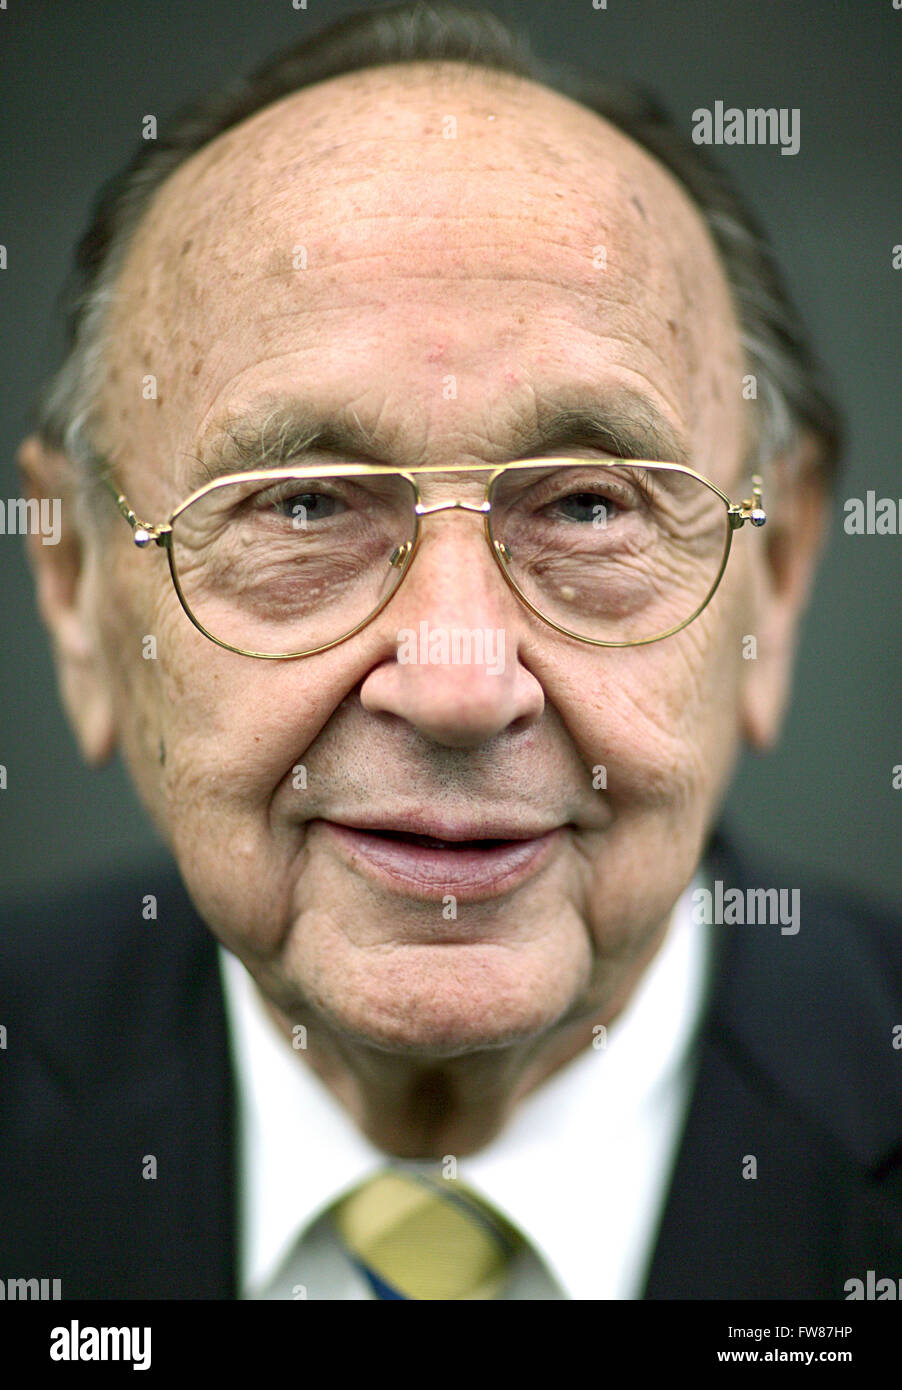 Former foreign minister Hans-Dietrich Genscher in the Wallraf Richartz Museum in Cologne on 20 October 2006. Stock Photo